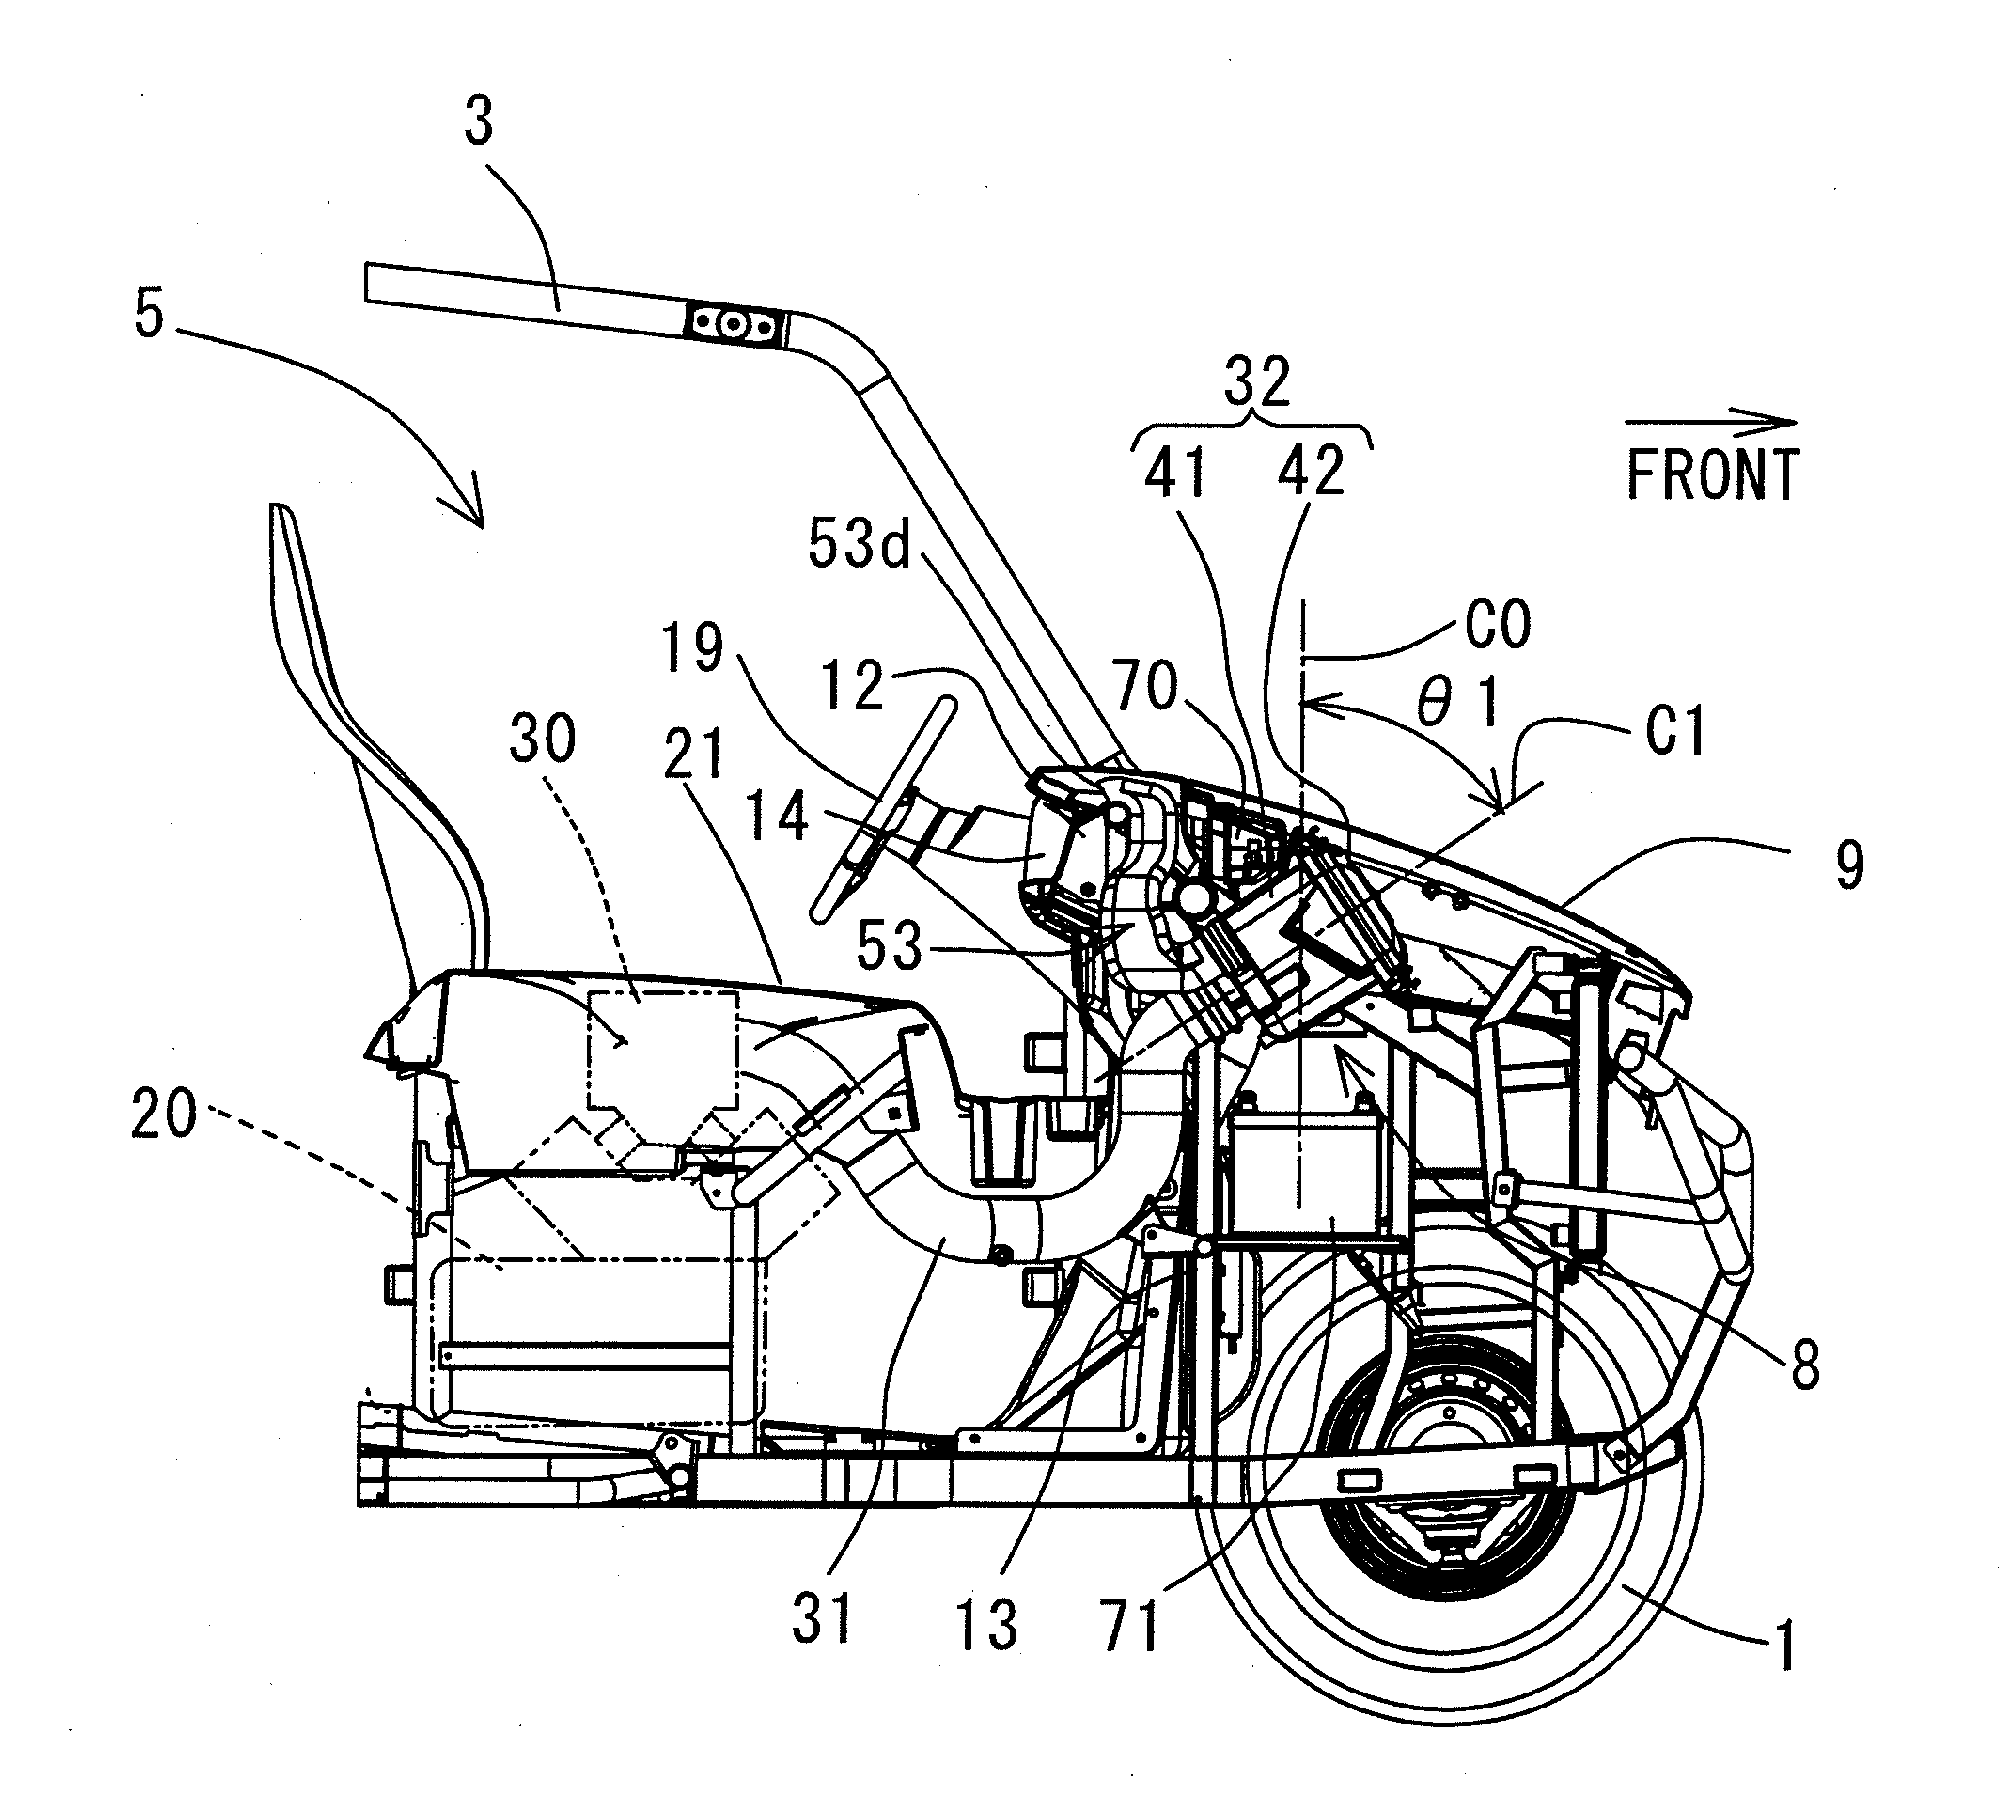 Utility vehicle with air-intake apparatus for engine